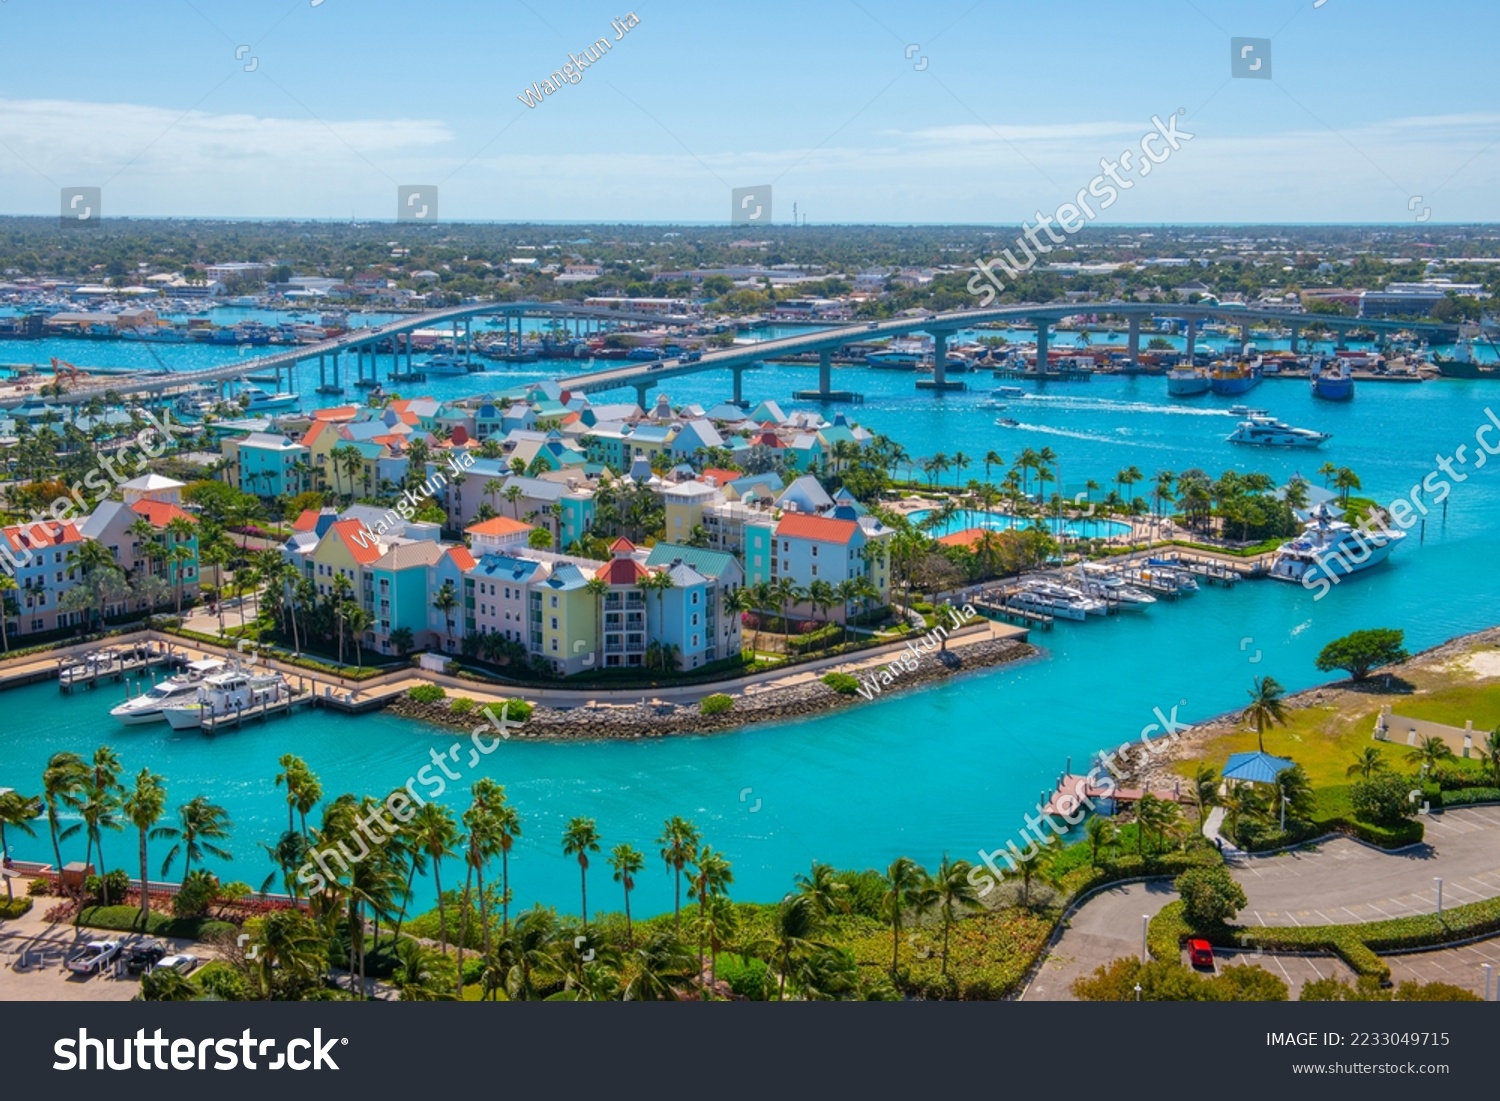 Harborside Villas aerial view at Nassau Harbour with Nassau downtown at the background, from Paradise Island, Bahamas. #2233049715